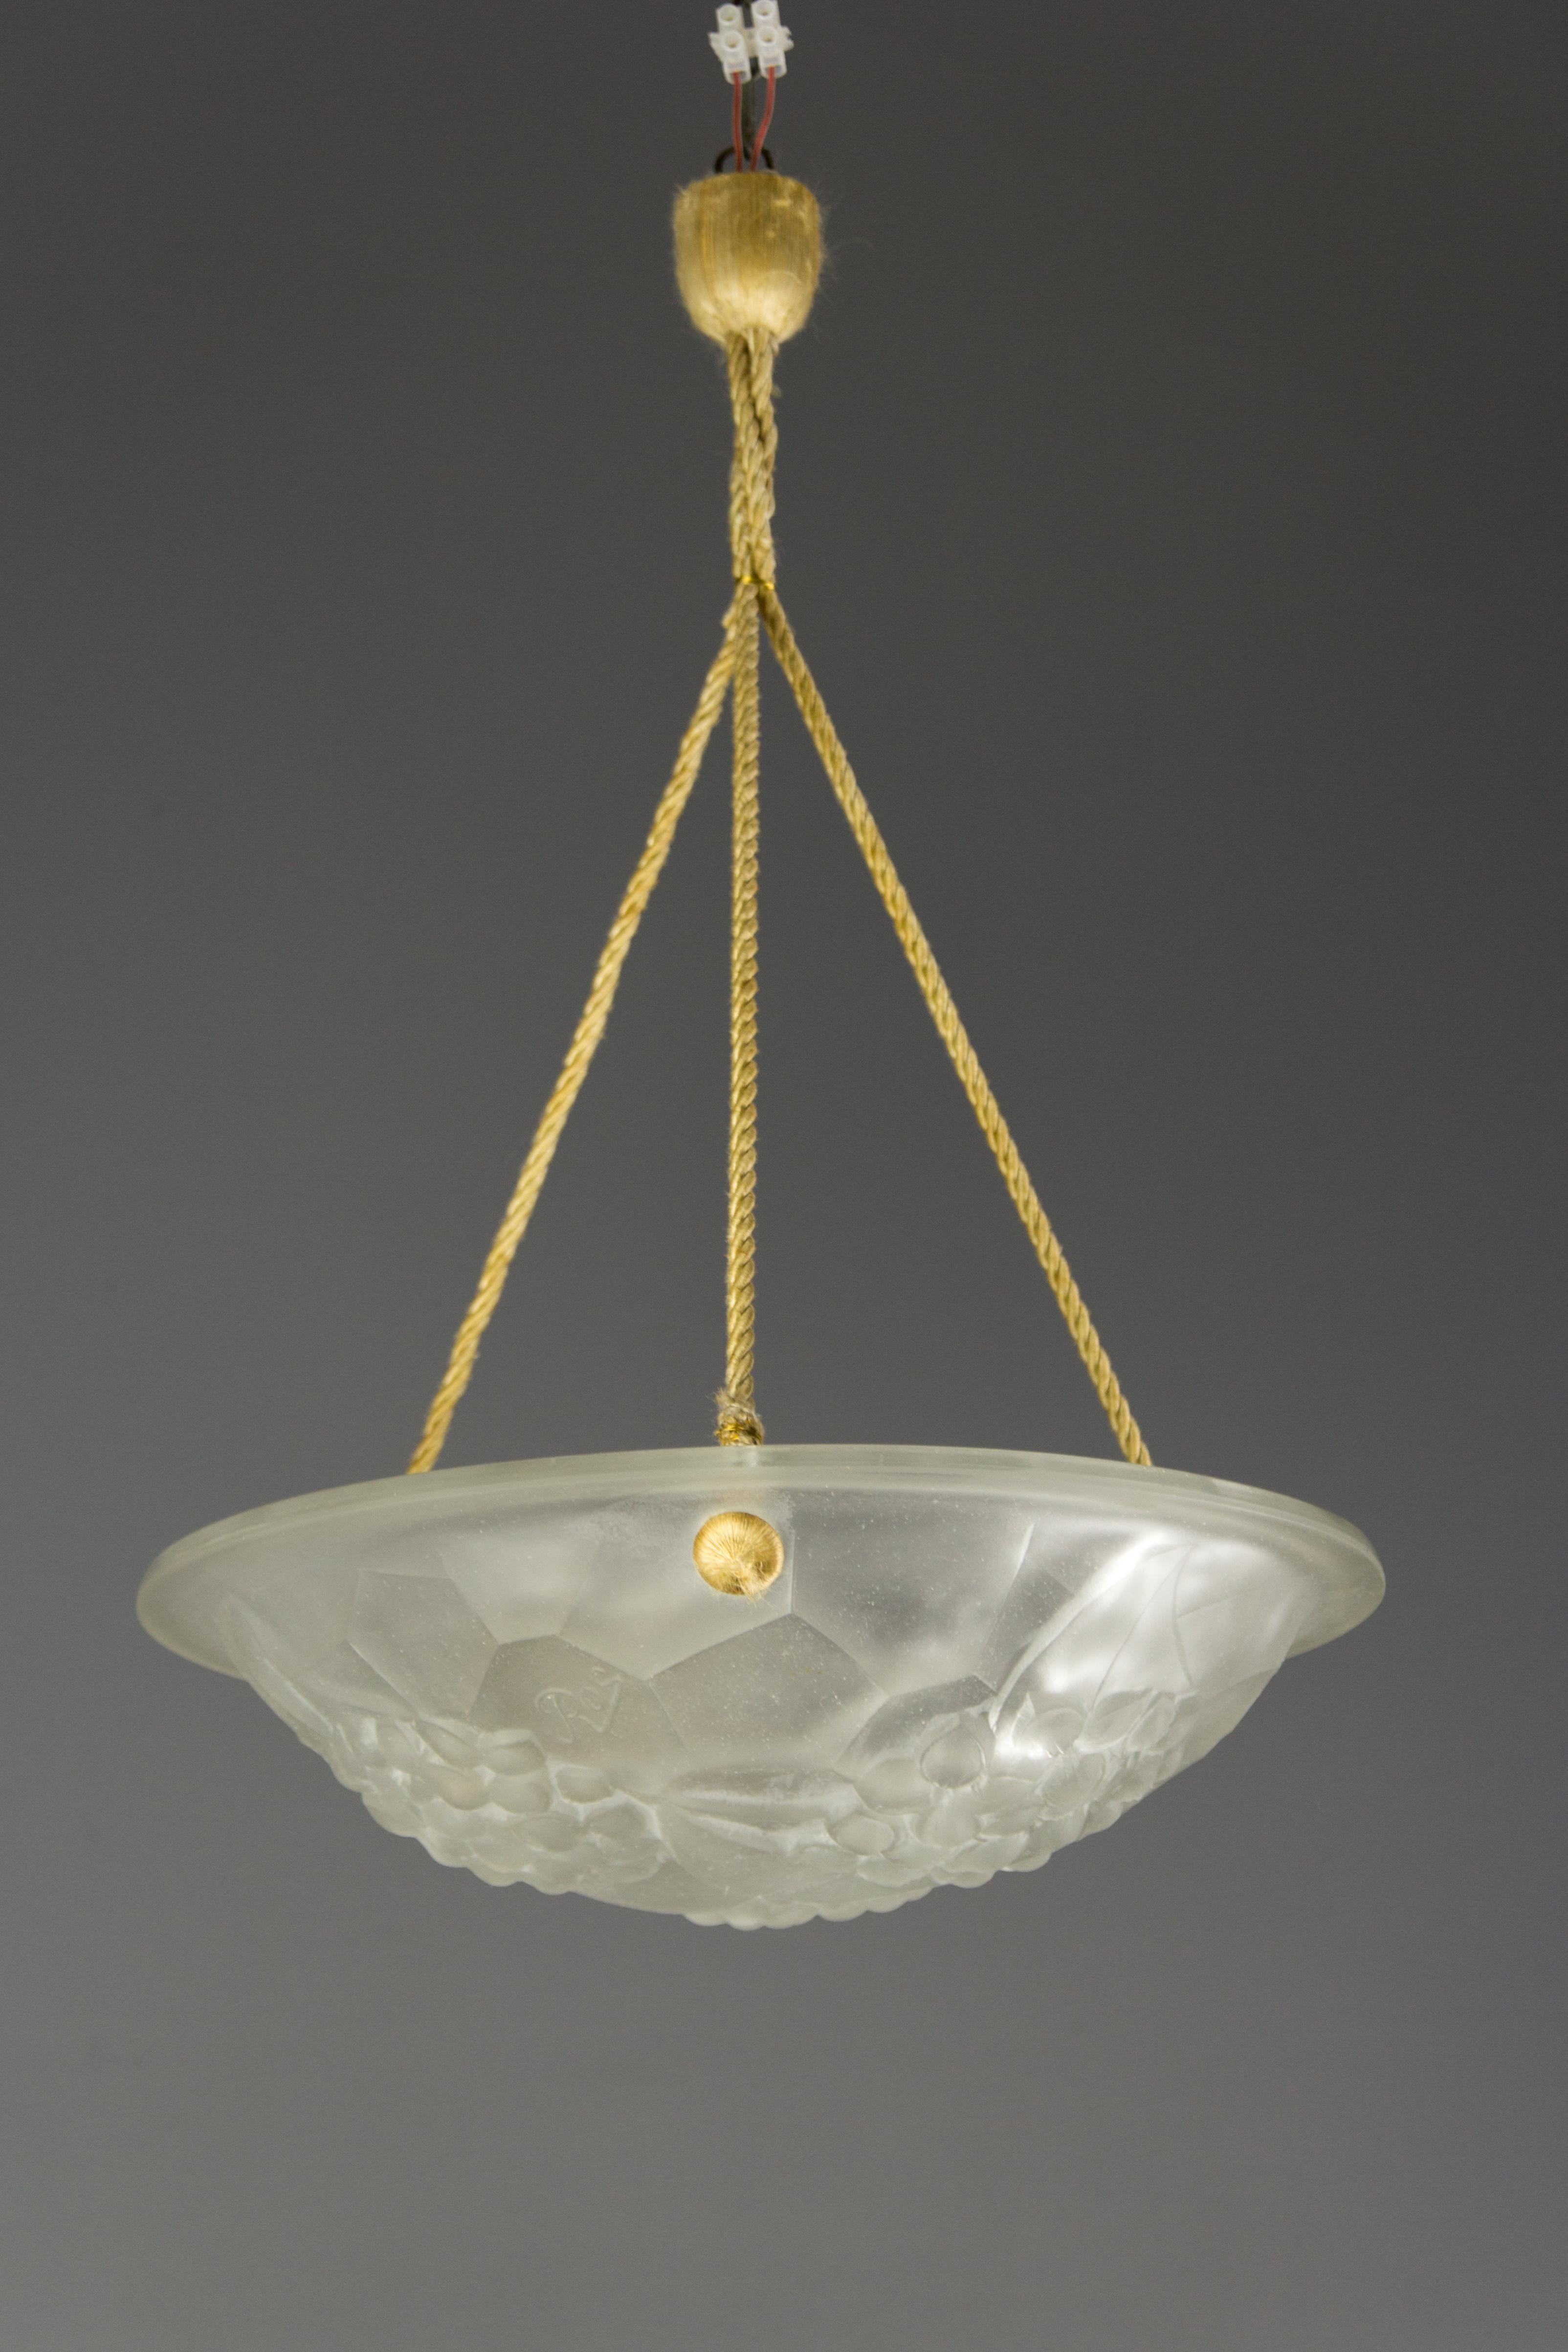 Beautiful French Art Deco pendant light/chandelier signed “ROS” for David Guéron (1892 -1950), Degue label glass maker artists from the 1930s. Clear frosted molded glass shade with a relief decor of flowers and leaves. Held by three cords with a